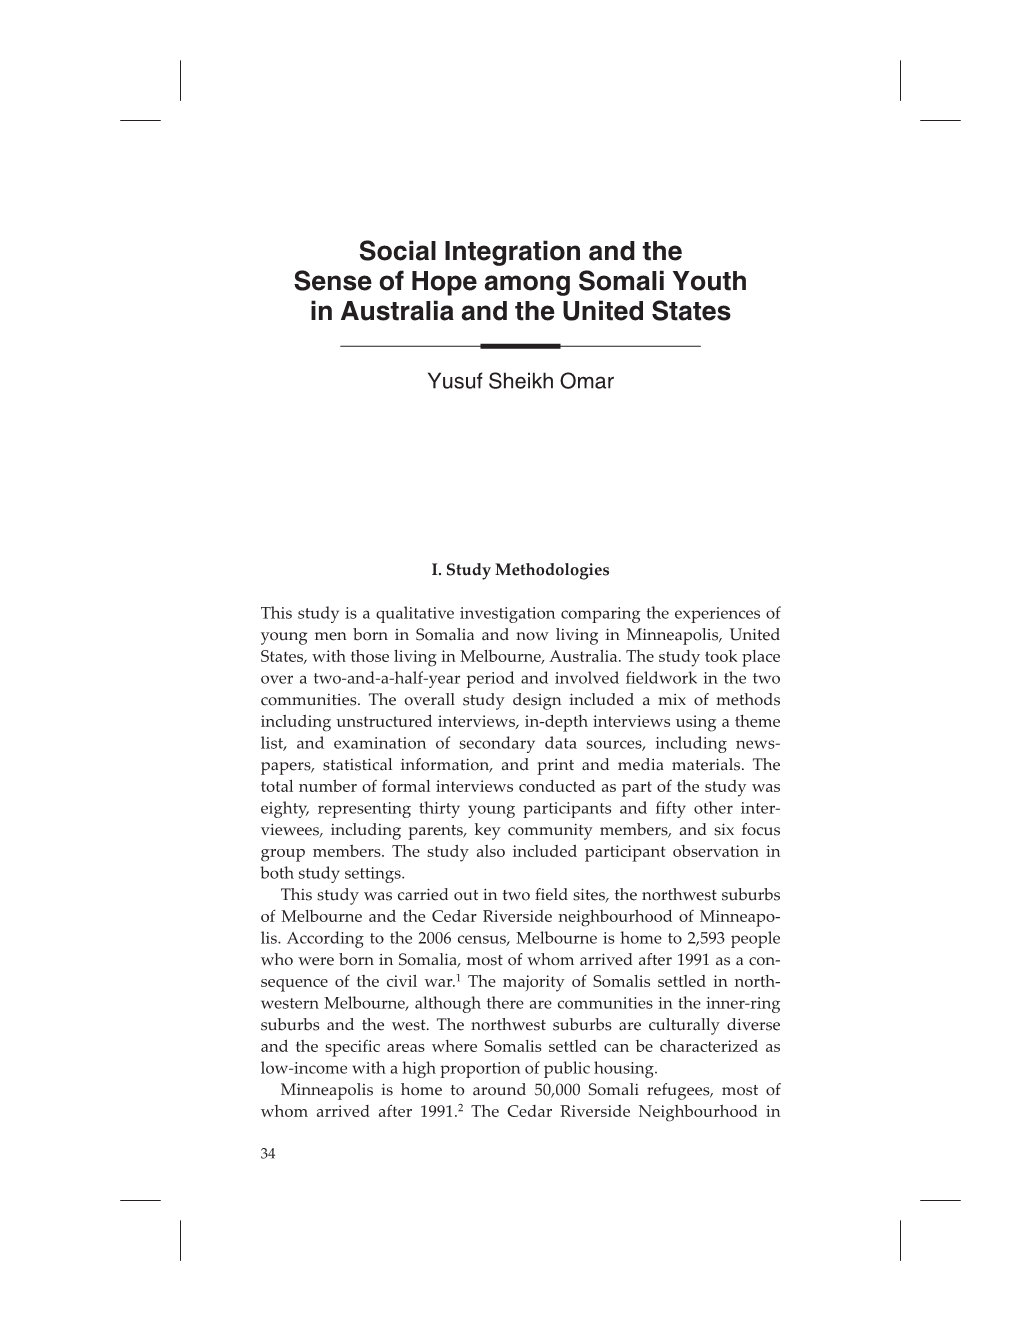 Social Integration and the Sense of Hope Among Somali Youth in Austrailia and the United States